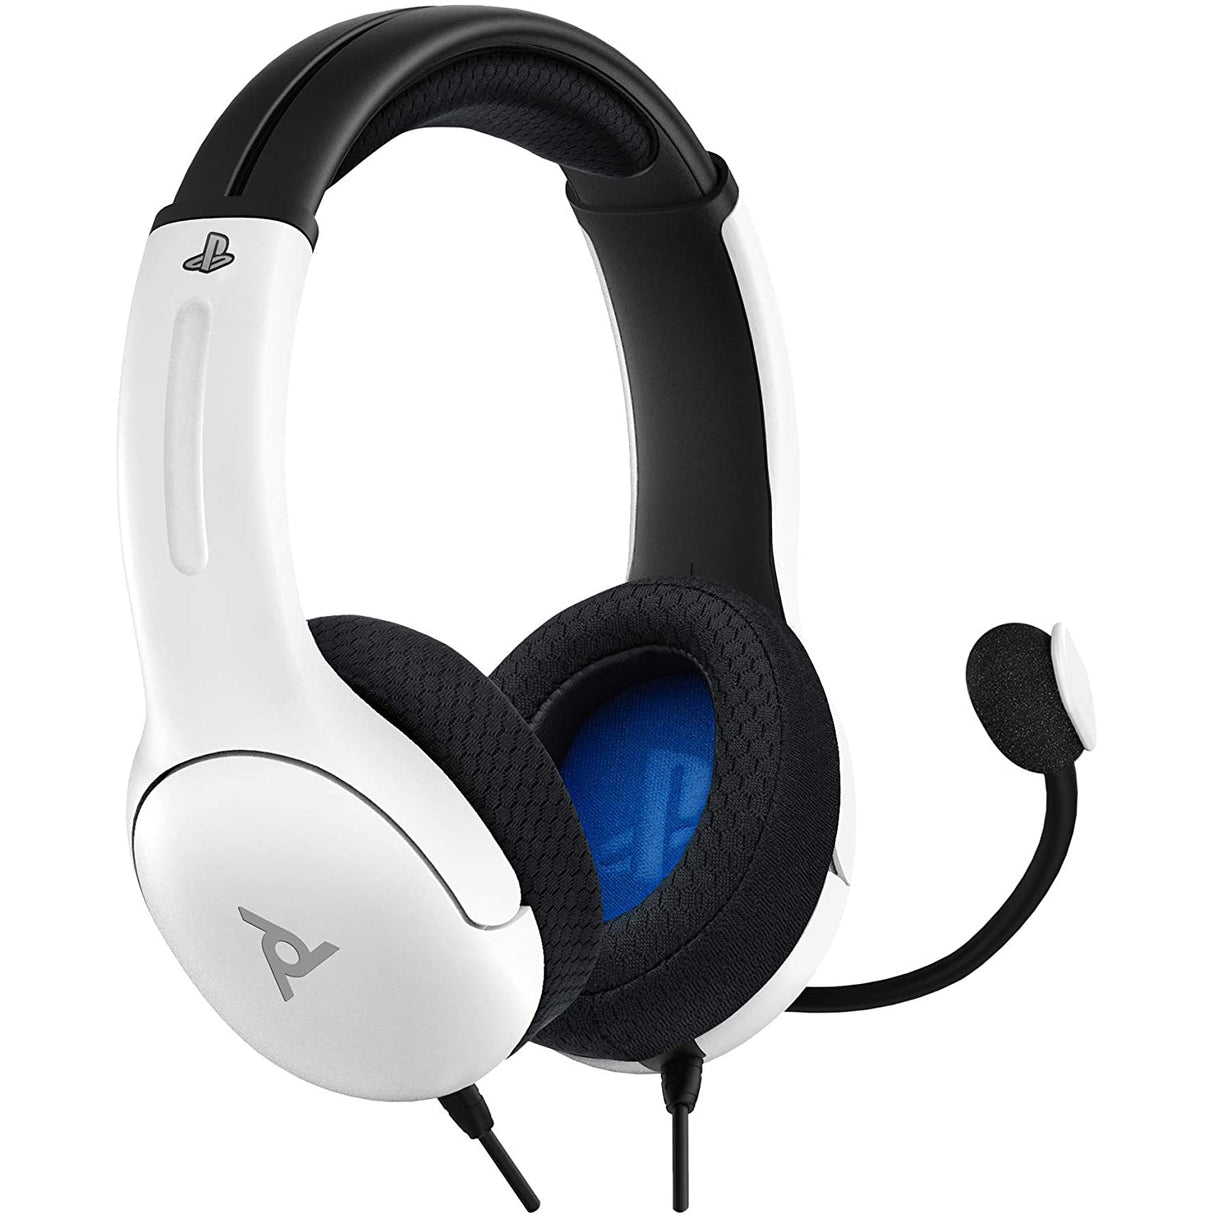 PDP LVL40 Wired Stereo Gaming Headset for PlayStation - White/Black - Refurbished Pristine